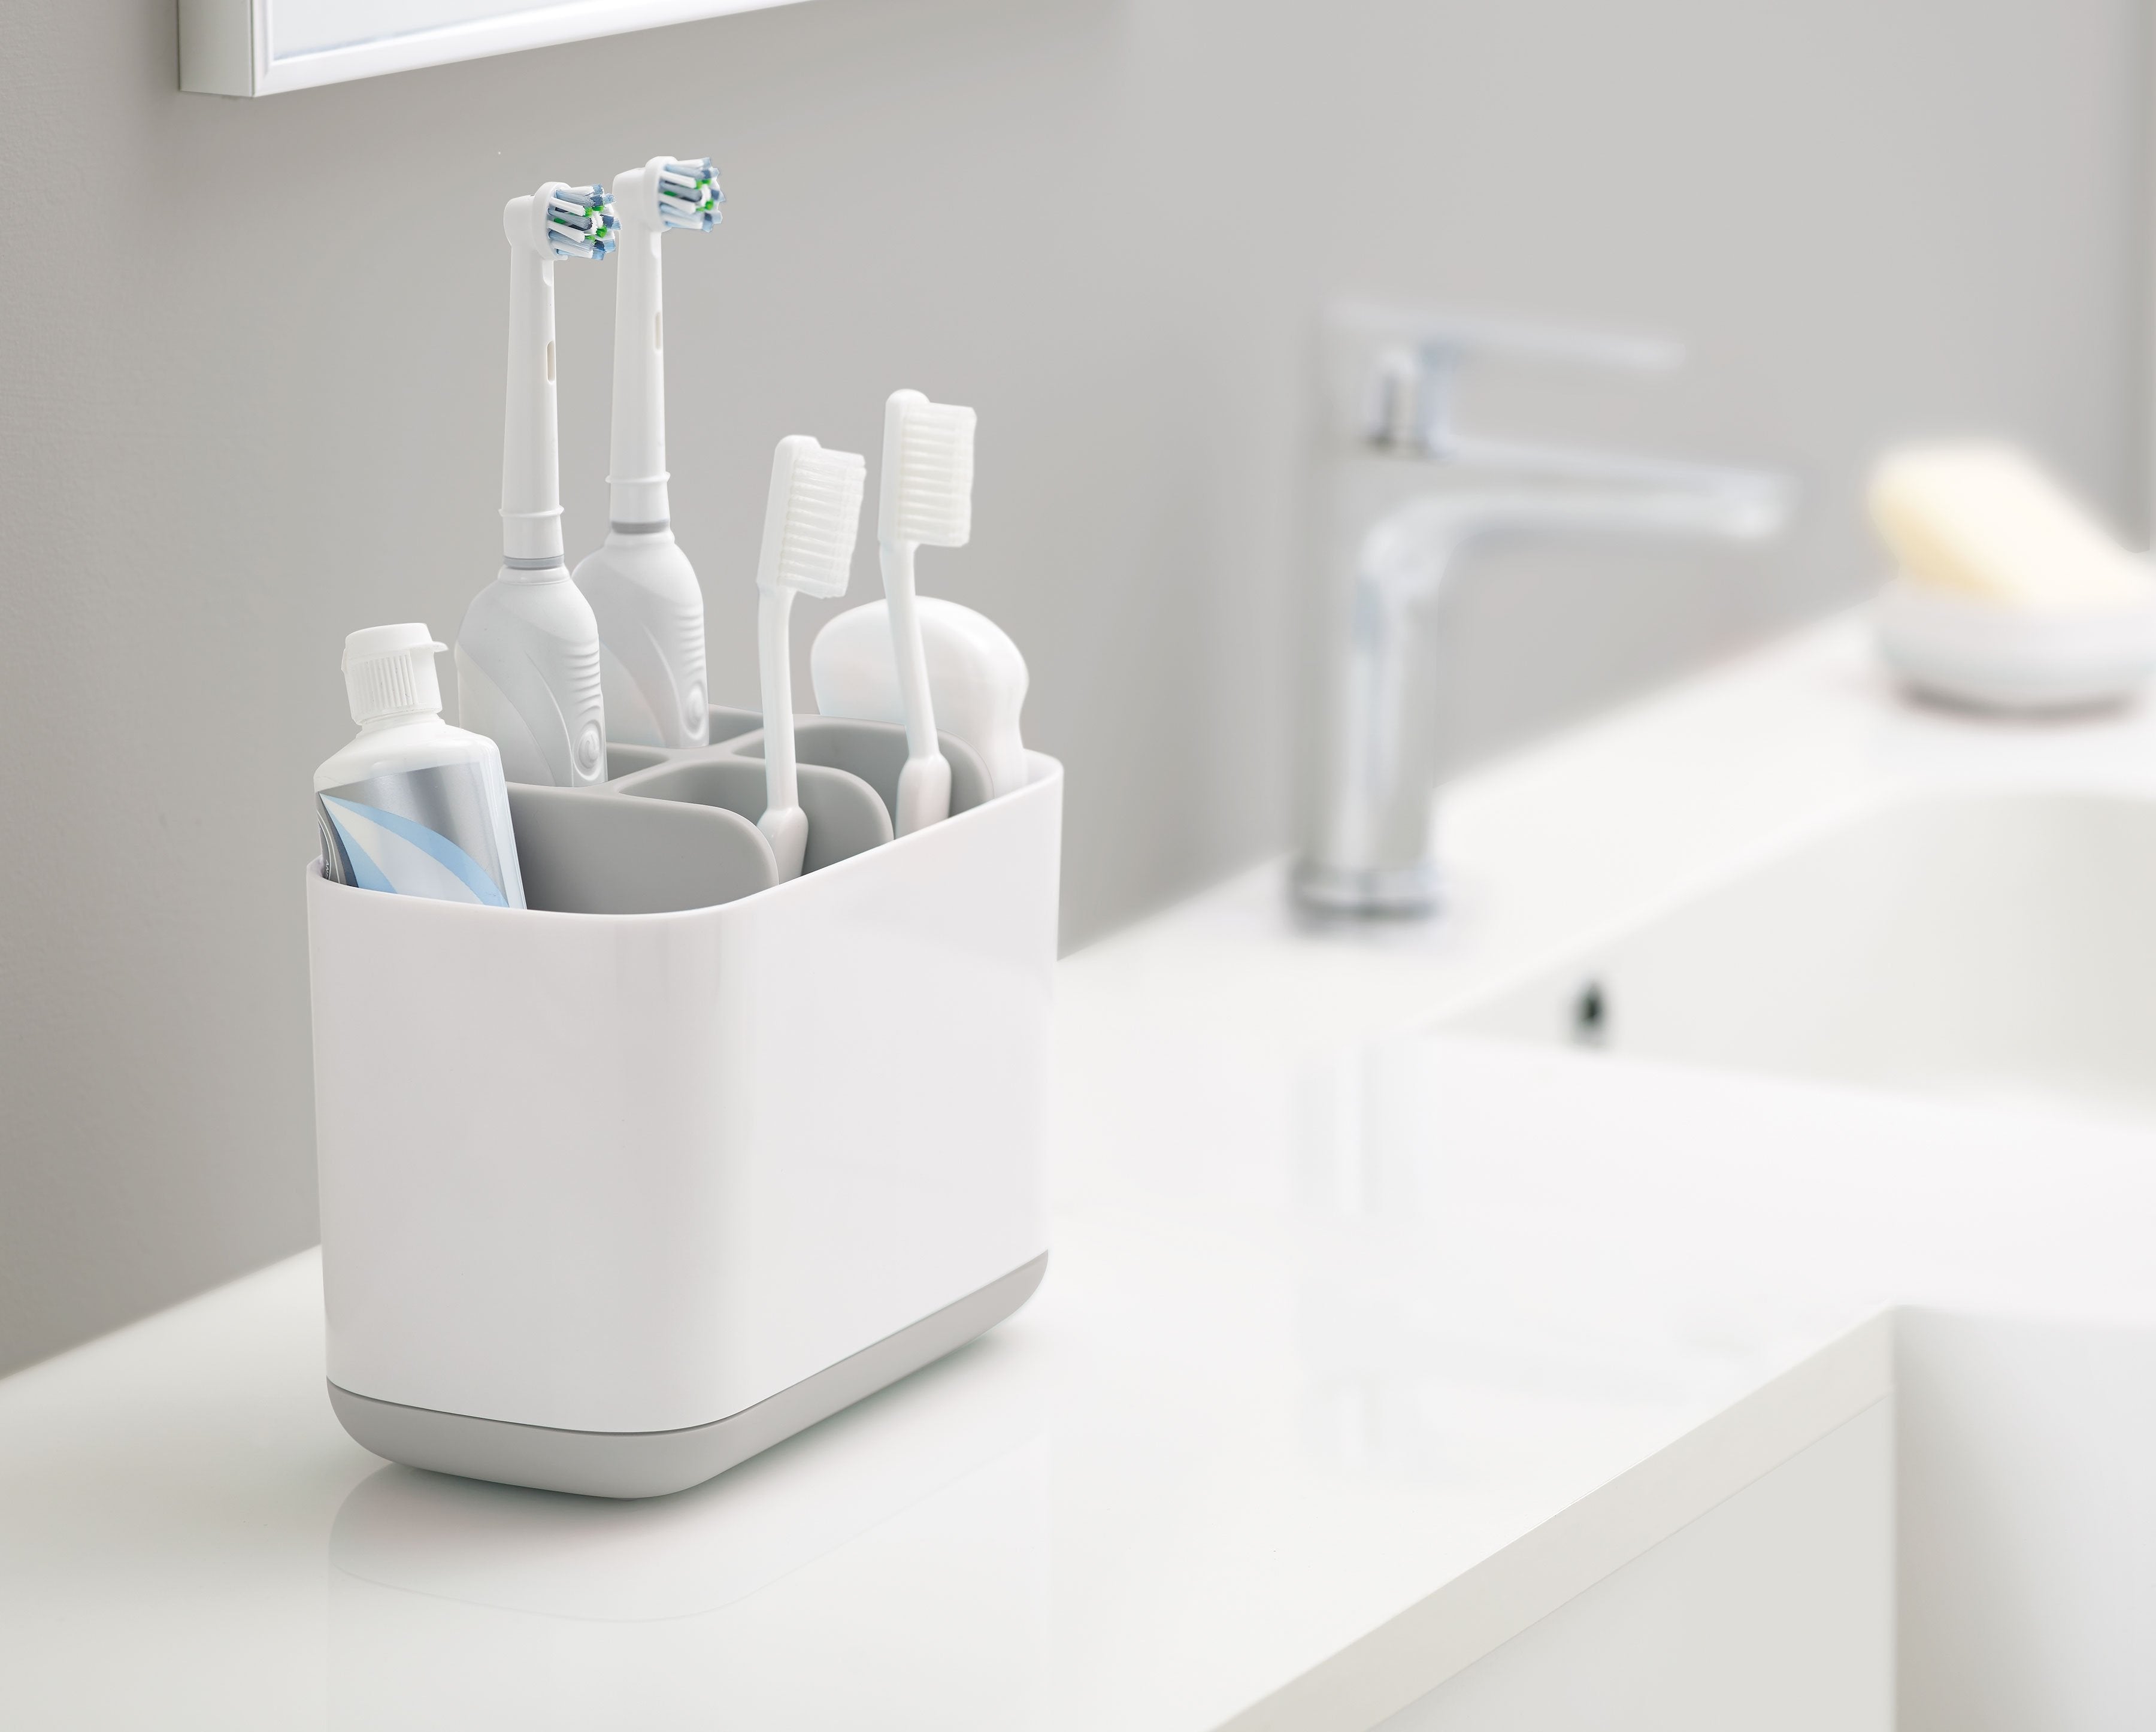 BEON.COM.AU  These toothbrush caddies have different sections for organising a variety of oral care items such as manual or electric toothbrushes and toothpaste tubes.  Versatile storage Ideal for electric or battery toothbrushes and toothpaste tubes Dismantles for easy cleaning Ventilated for quick drying N... Joseph Joseph at BEON.COM.AU